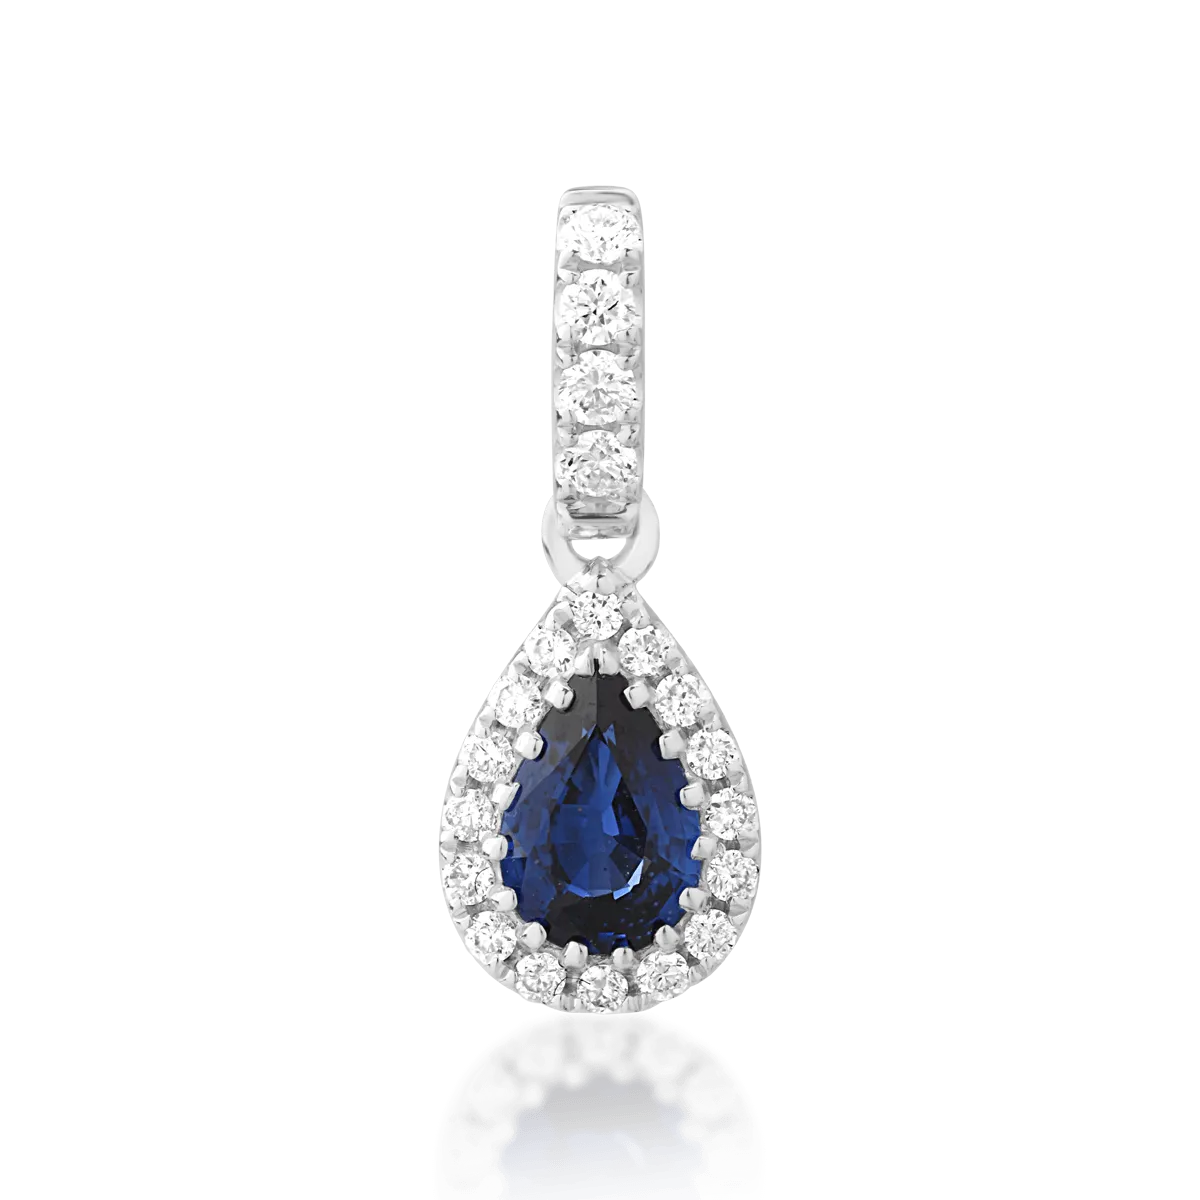 18K white gold pendant with 0.45ct sapphire and 0.12ct diamonds